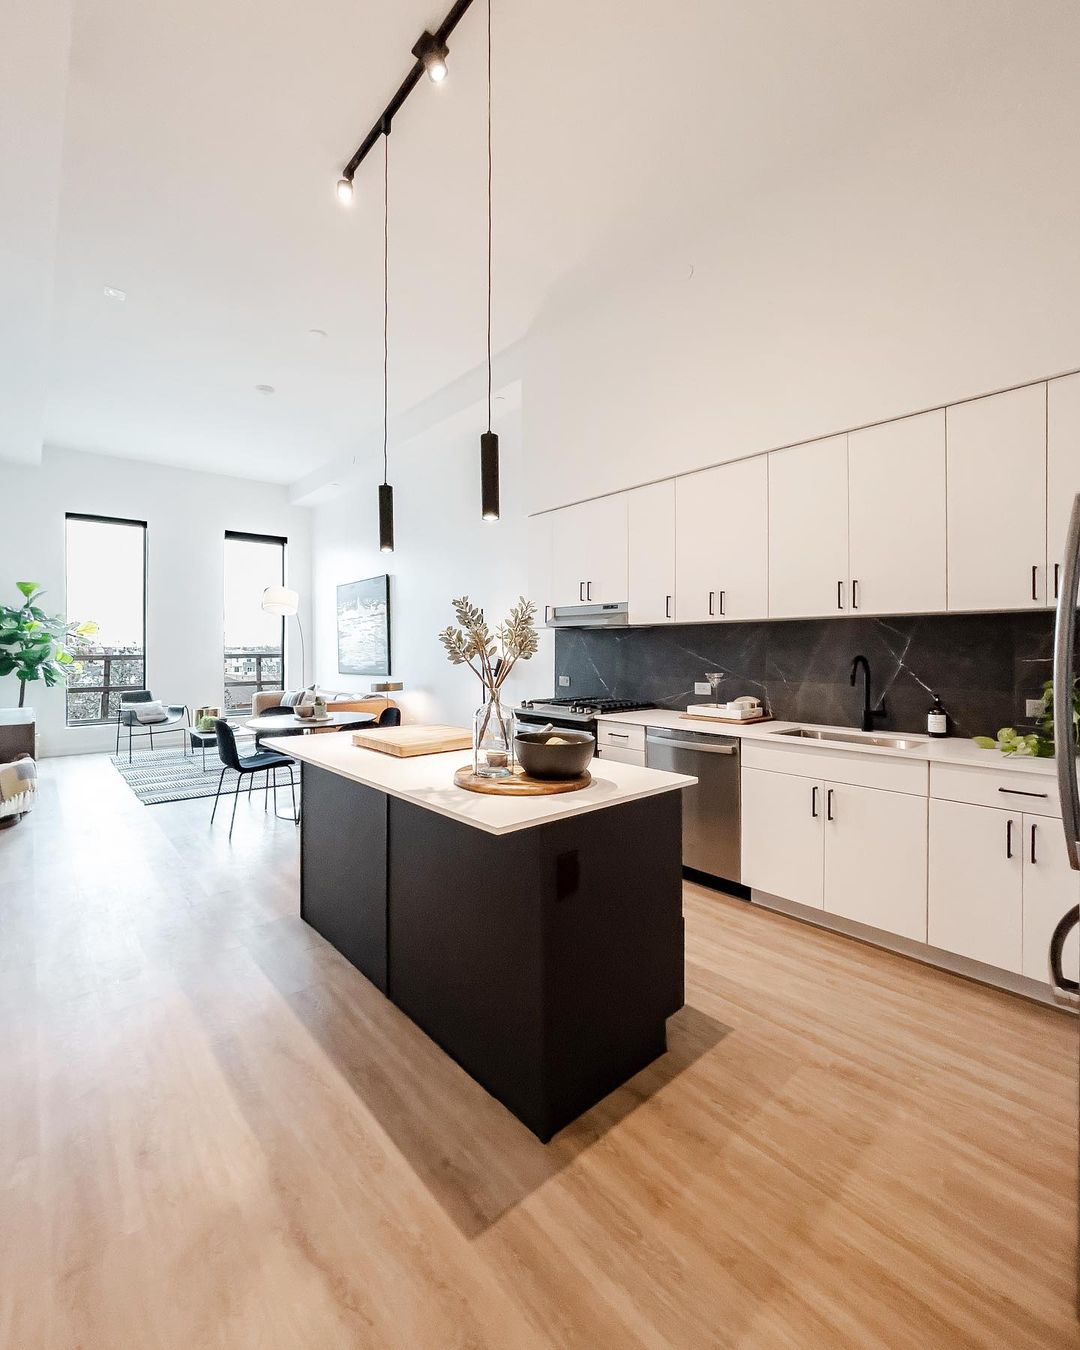 Updated Hardwood Open Concept Apartment Kitchen & Dining Space. Photo by Instagram user @tom_coselli